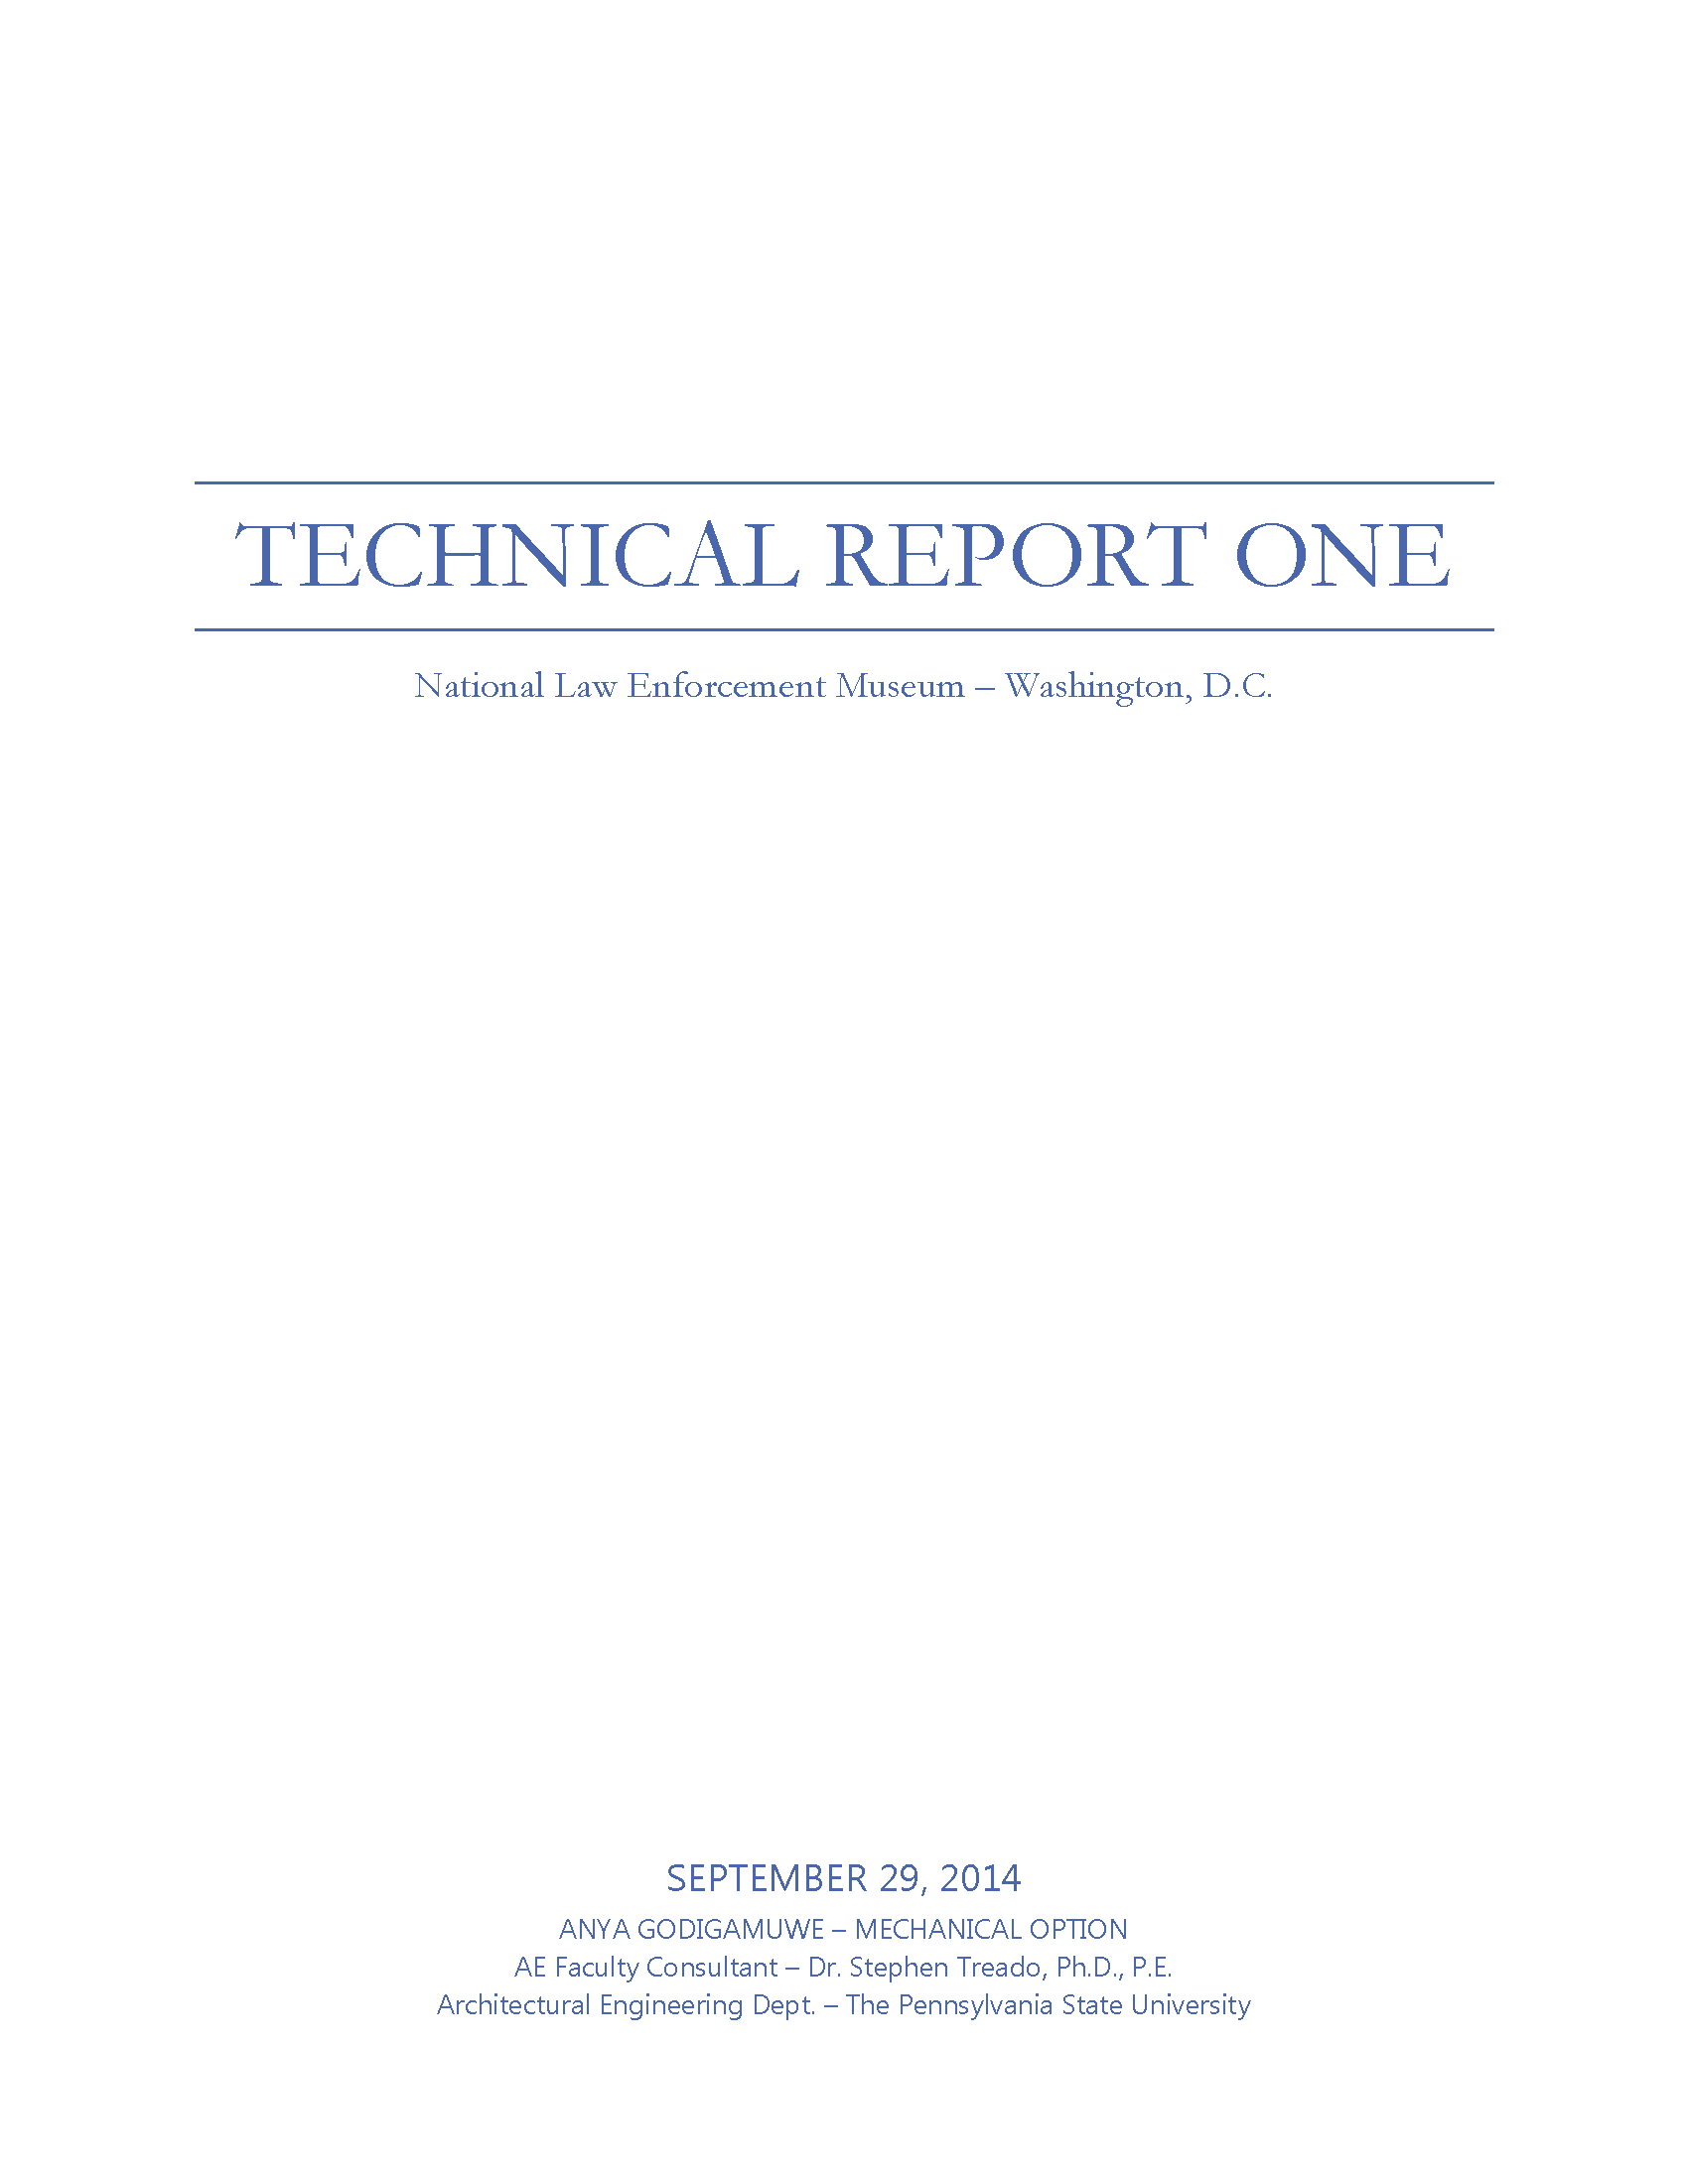 Technical Report One